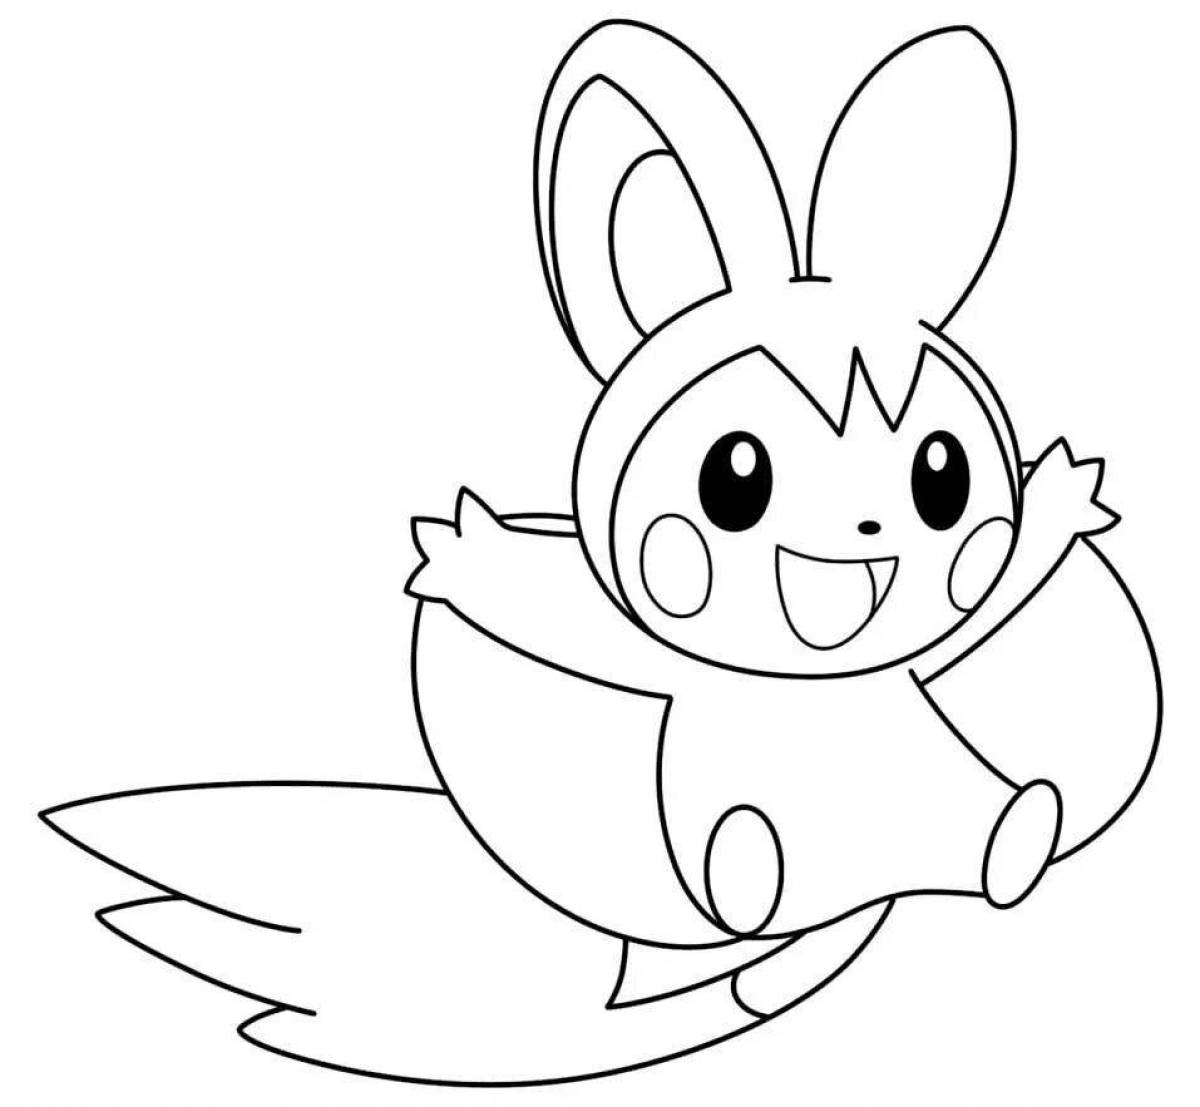 Awesome pokemon coloring pages